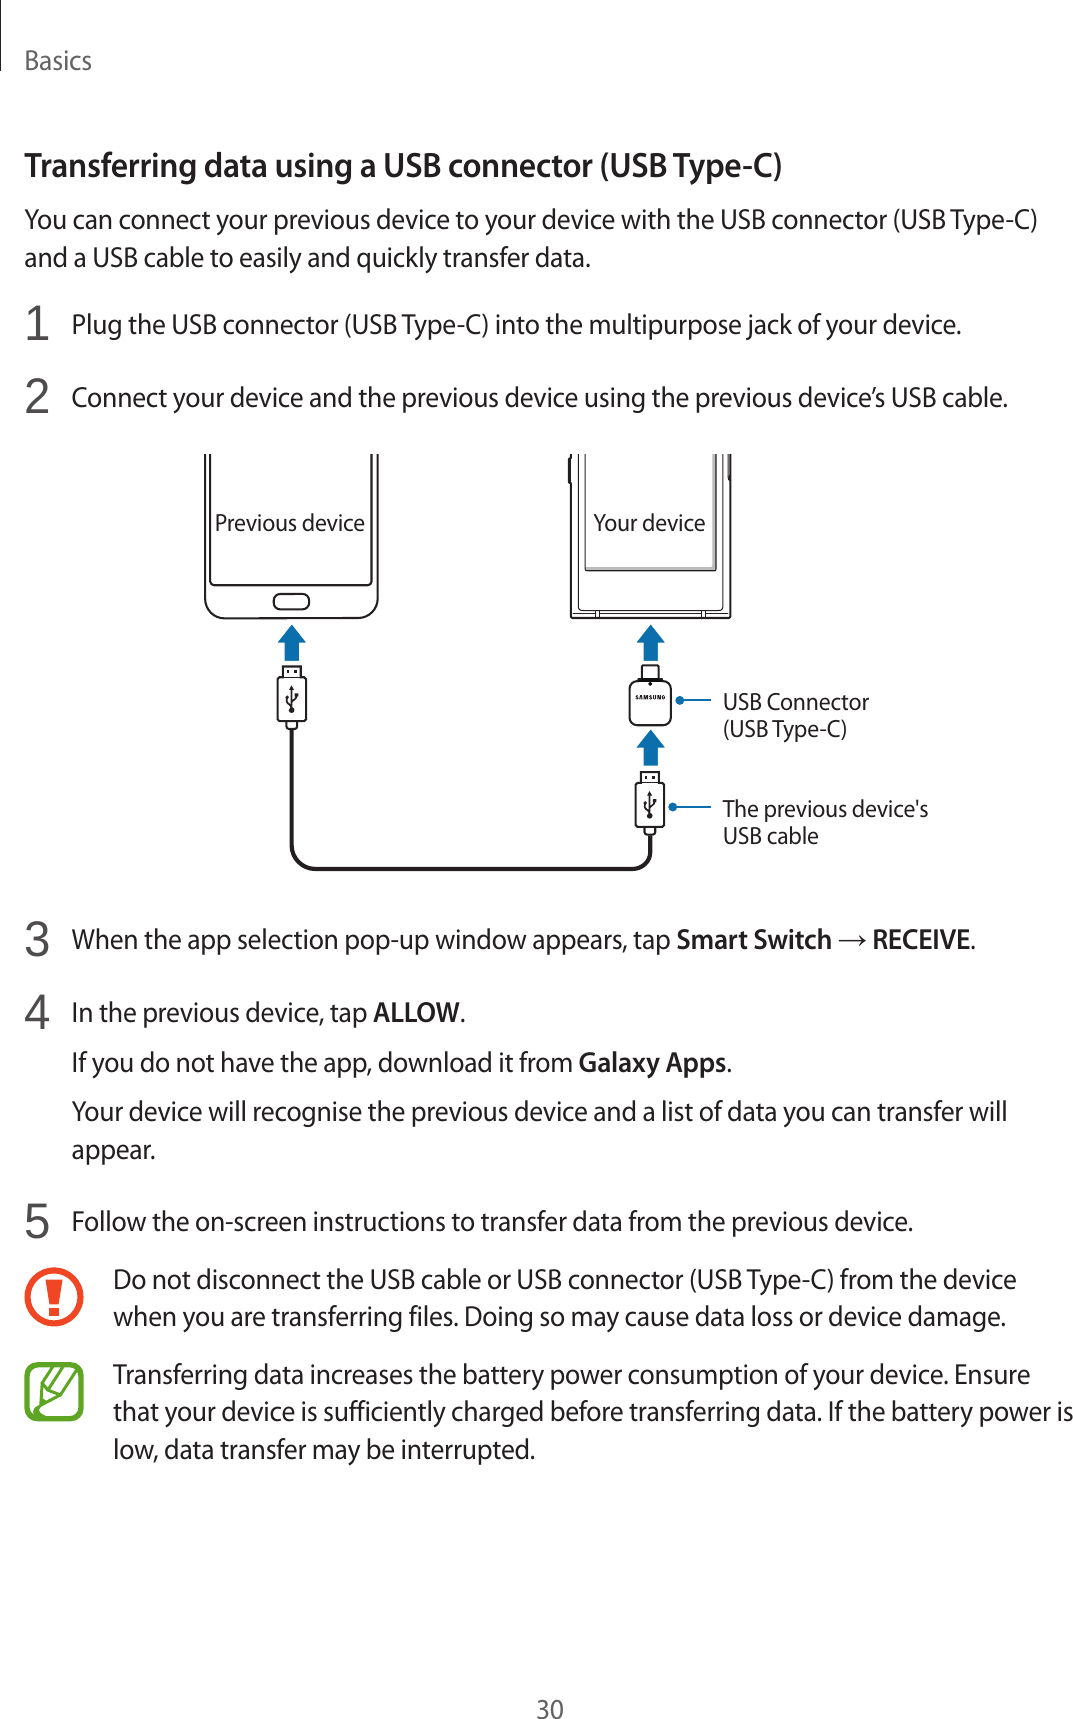 Basics30Transferring data using a USB connector (USB Type-C)You can connect your previous device to your device with the USB connector (USB Type-C) and a USB cable to easily and quickly transfer data.1  Plug the USB connector (USB Type-C) into the multipurpose jack of your device.2  Connect your device and the previous device using the previous device’s USB cable.USB Connector (USB Type-C)Your devicePrevious deviceThe previous device&apos;s USB cable3  When the app selection pop-up window appears, tap Smart Switch → RECEIVE.4  In the previous device, tap ALLOW.If you do not have the app, download it from Galaxy Apps.Your device will recognise the previous device and a list of data you can transfer will appear.5  Follow the on-screen instructions to transfer data from the previous device.Do not disconnect the USB cable or USB connector (USB Type-C) from the device when you are transferring files. Doing so may cause data loss or device damage.Transferring data increases the battery power consumption of your device. Ensure that your device is sufficiently charged before transferring data. If the battery power is low, data transfer may be interrupted.